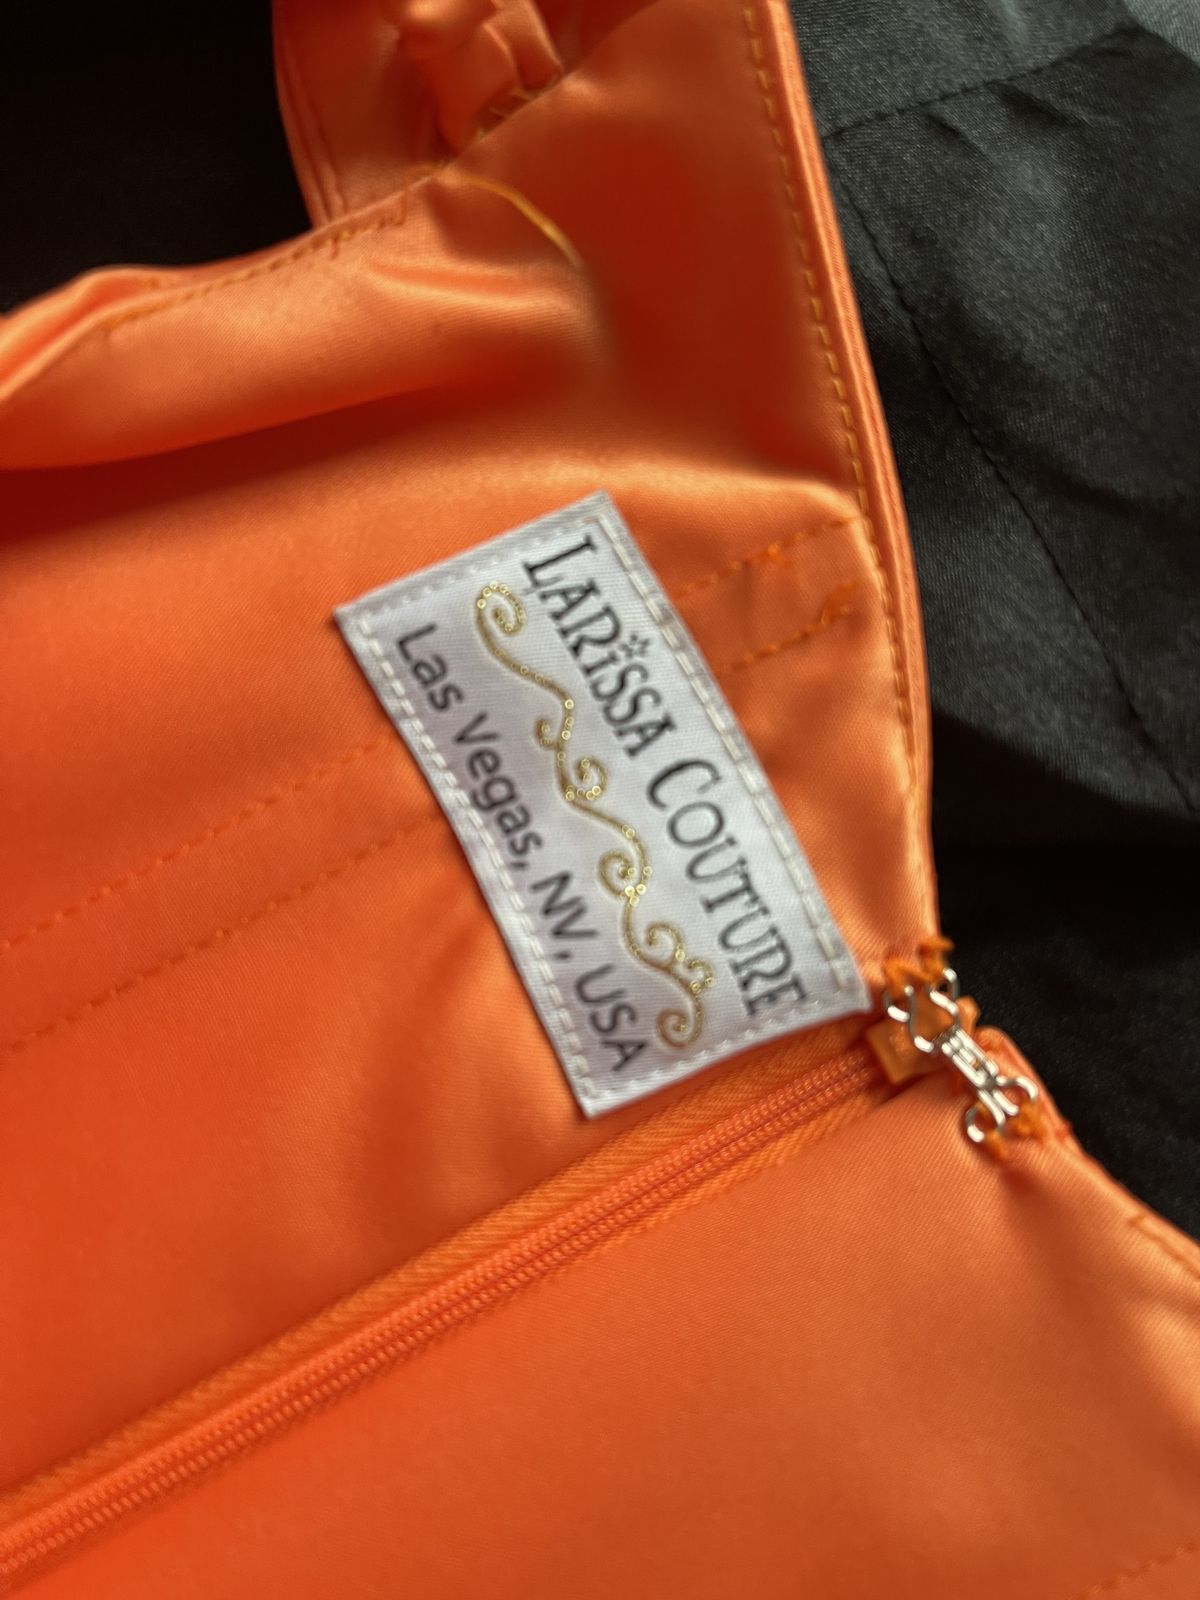 Larissa Couture Size 0 Off The Shoulder Orange Cocktail Dress on Queenly